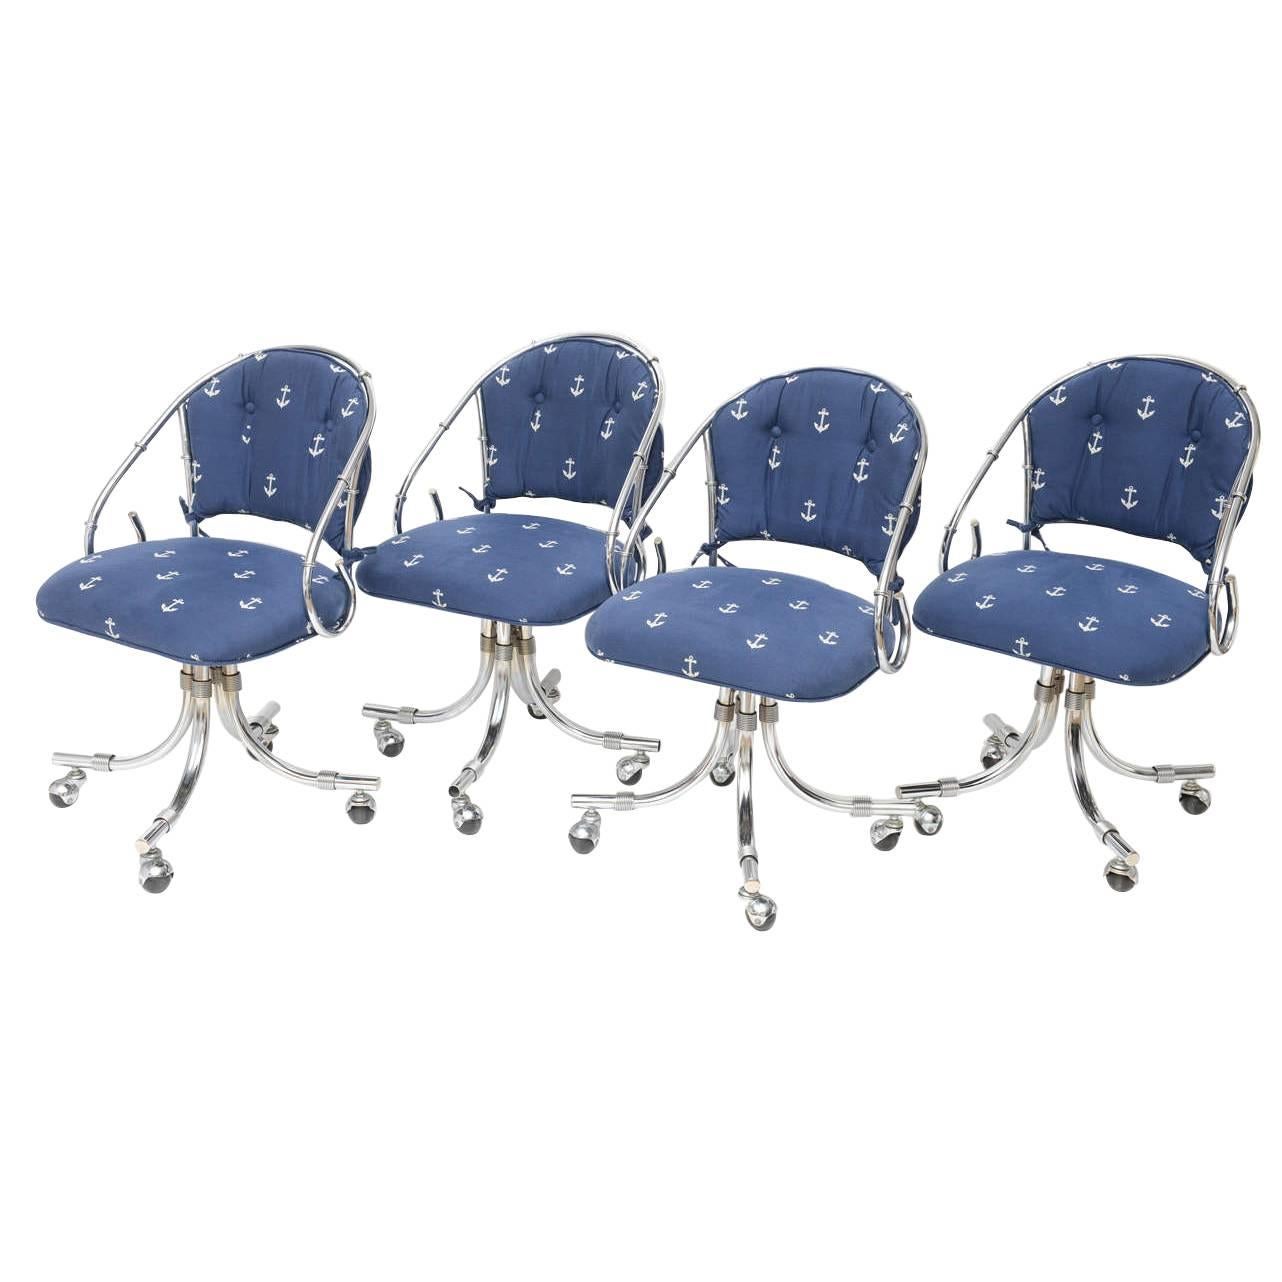 Four Chrome Swivel Chairs in Nautical Upholstery 